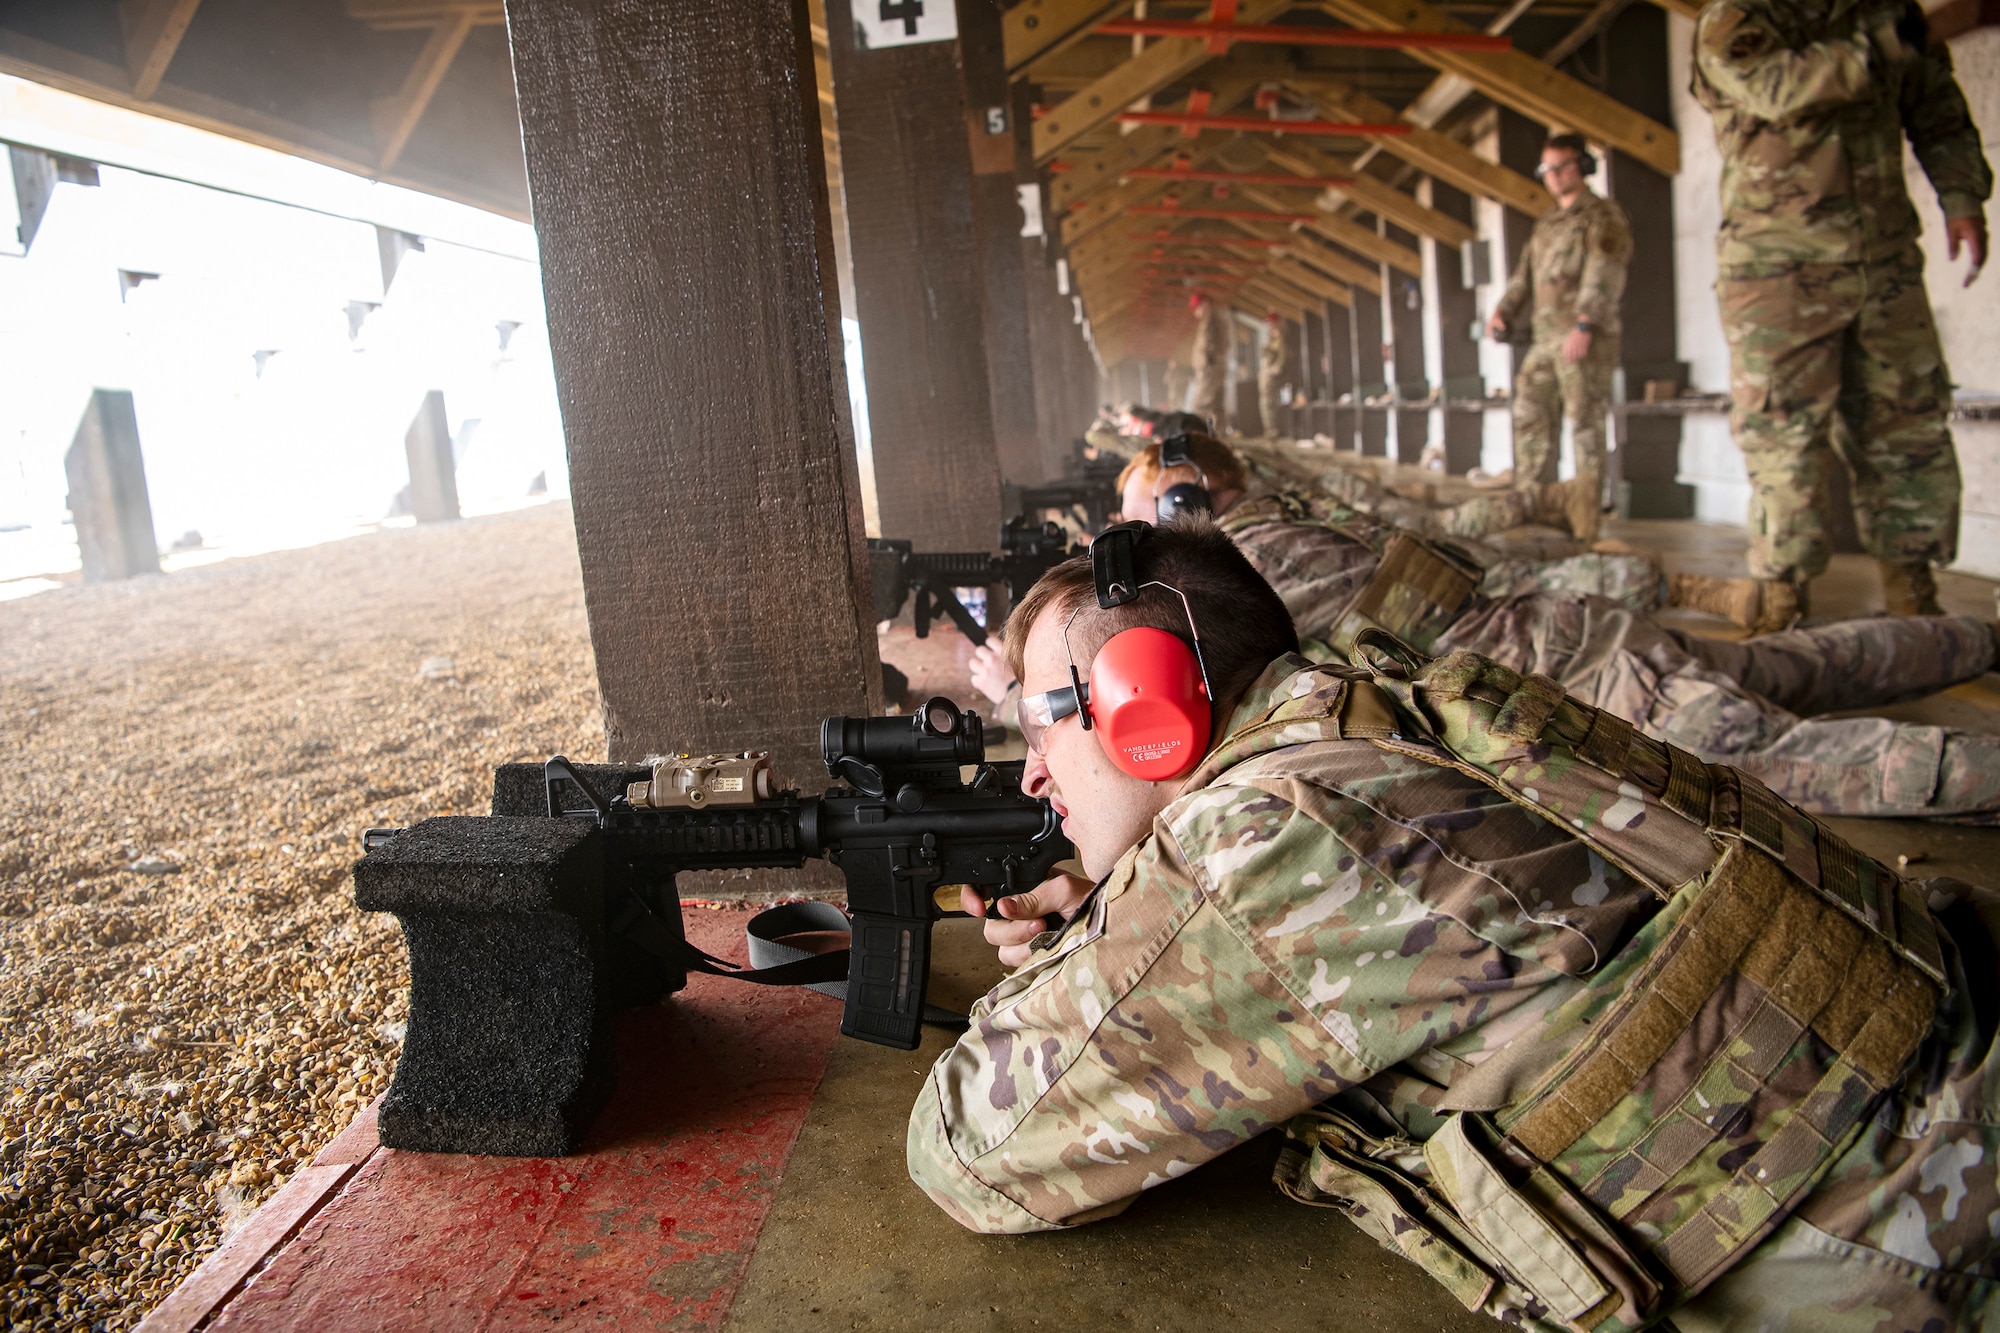 Airmen from the 423d Security Forces Squadron fire their M4 carbines during a proficiency course at RAF Molesworth, England, Aug. 19, 2022. During the course instructors from the 820th Base Defense Group and 435th Contingency Response Group provided oversight and guidance to help critique and advance the combat arms skills of the defenders from the 423d SFS. (U.S. Air Force photo by Staff Sgt. Eugene Oliver)